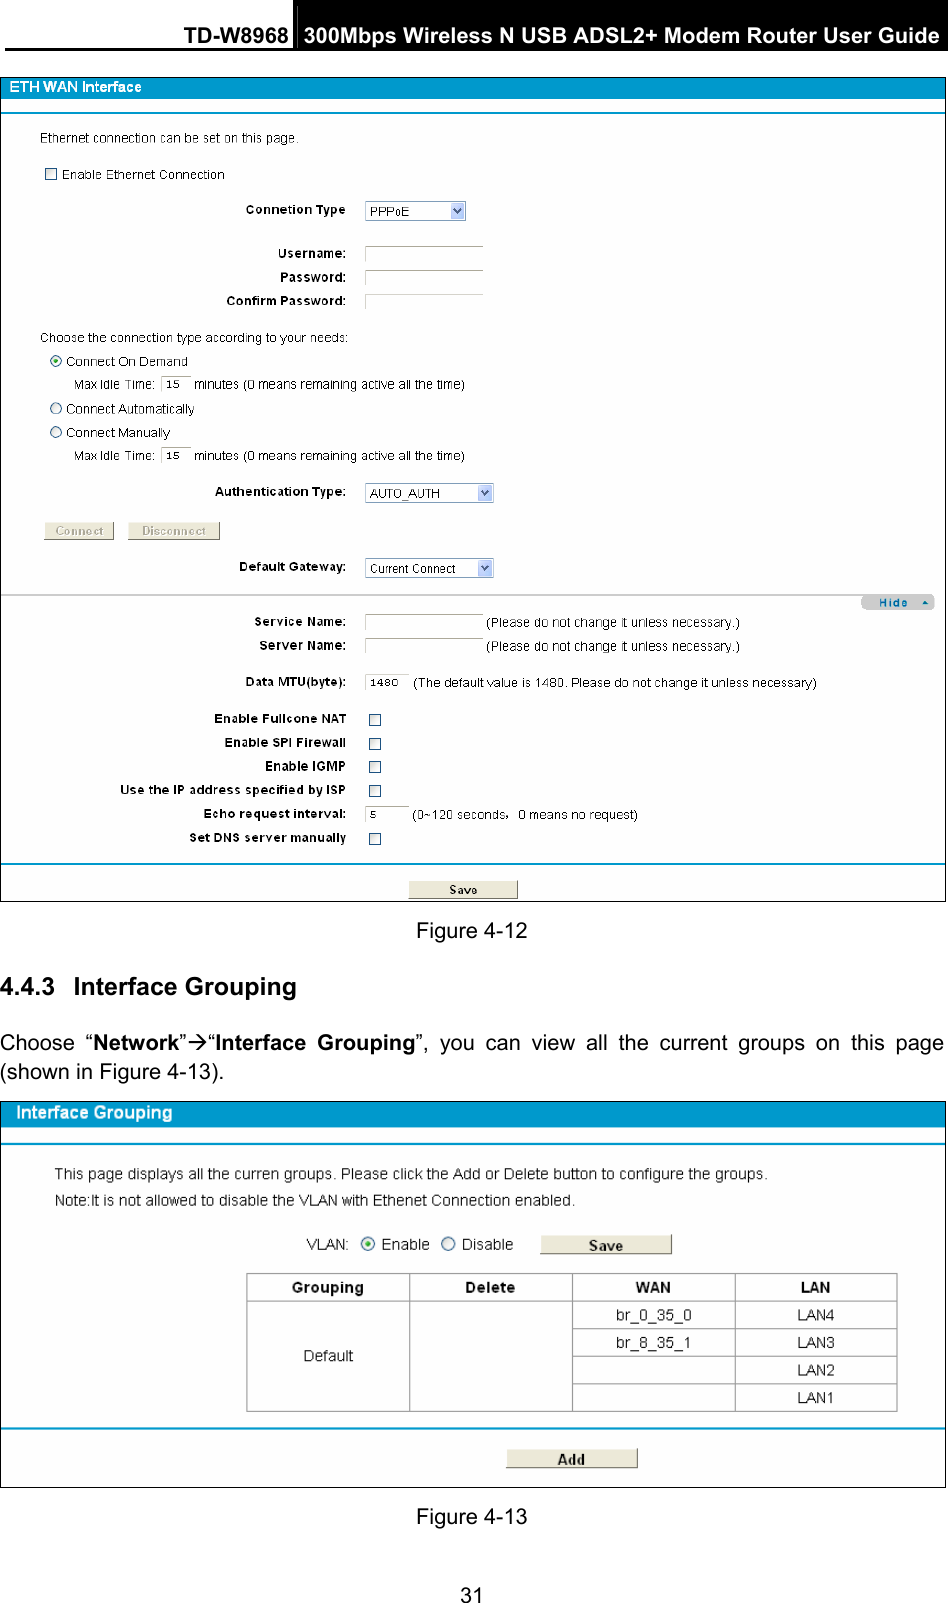 TD-W8968  300Mbps Wireless N USB ADSL2+ Modem Router User Guide 31  Figure 4-12 4.4.3  Interface Grouping Choose “Network”Æ“Interface Grouping”, you can view all the current groups on this page (shown in Figure 4-13).   Figure 4-13 